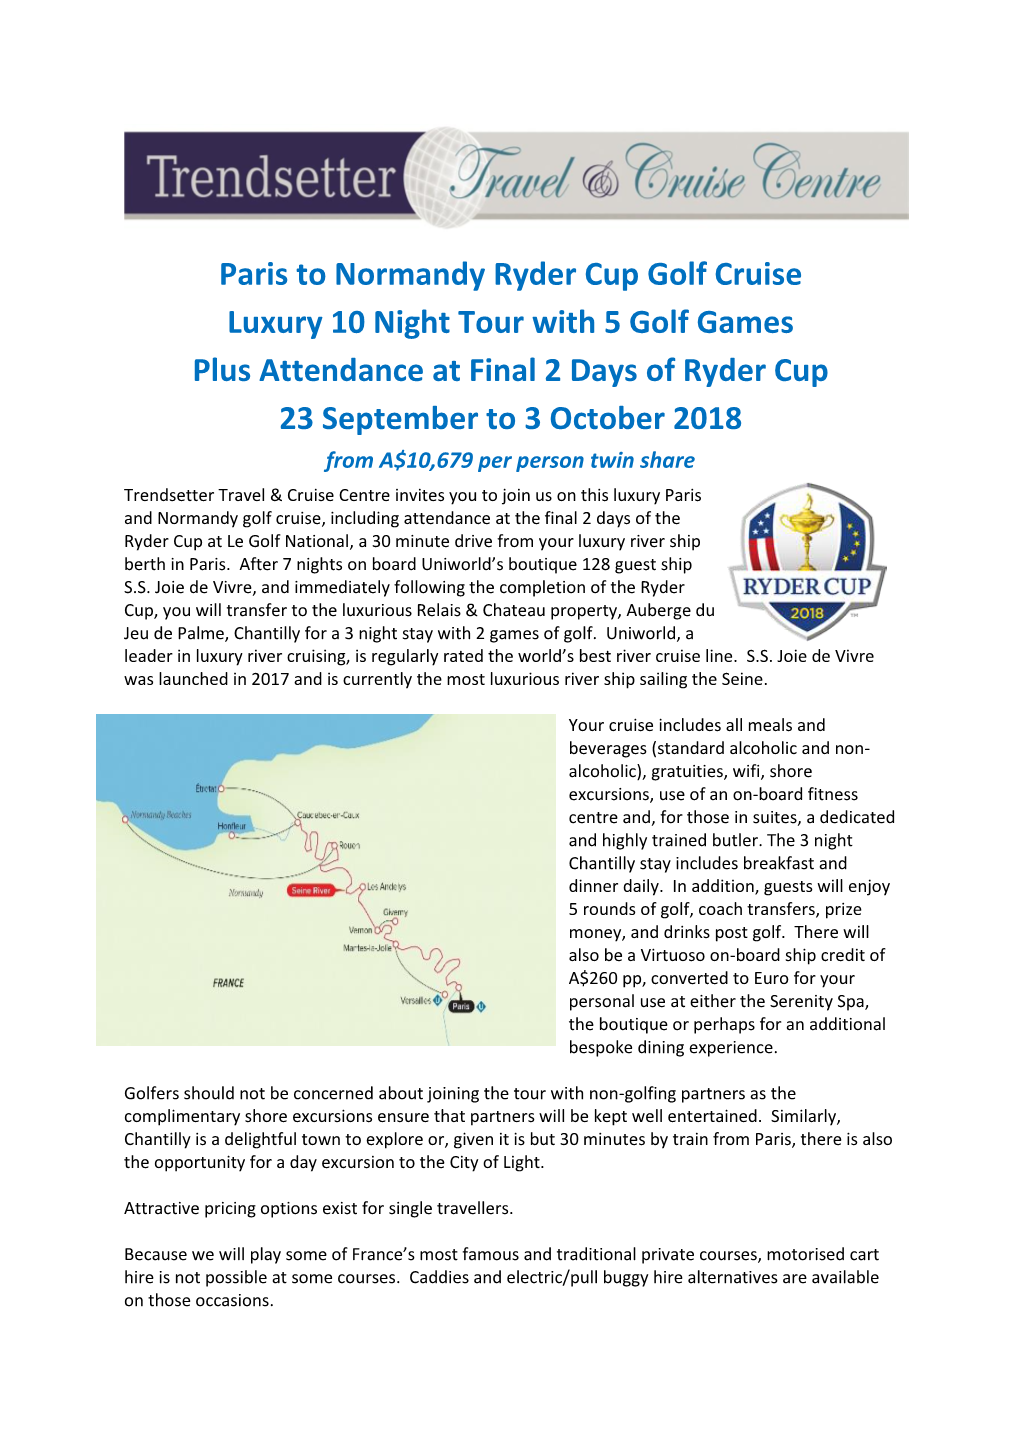 Paris to Normandy Ryder Cup Golf Cruise Luxury 10 Night Tour with 5